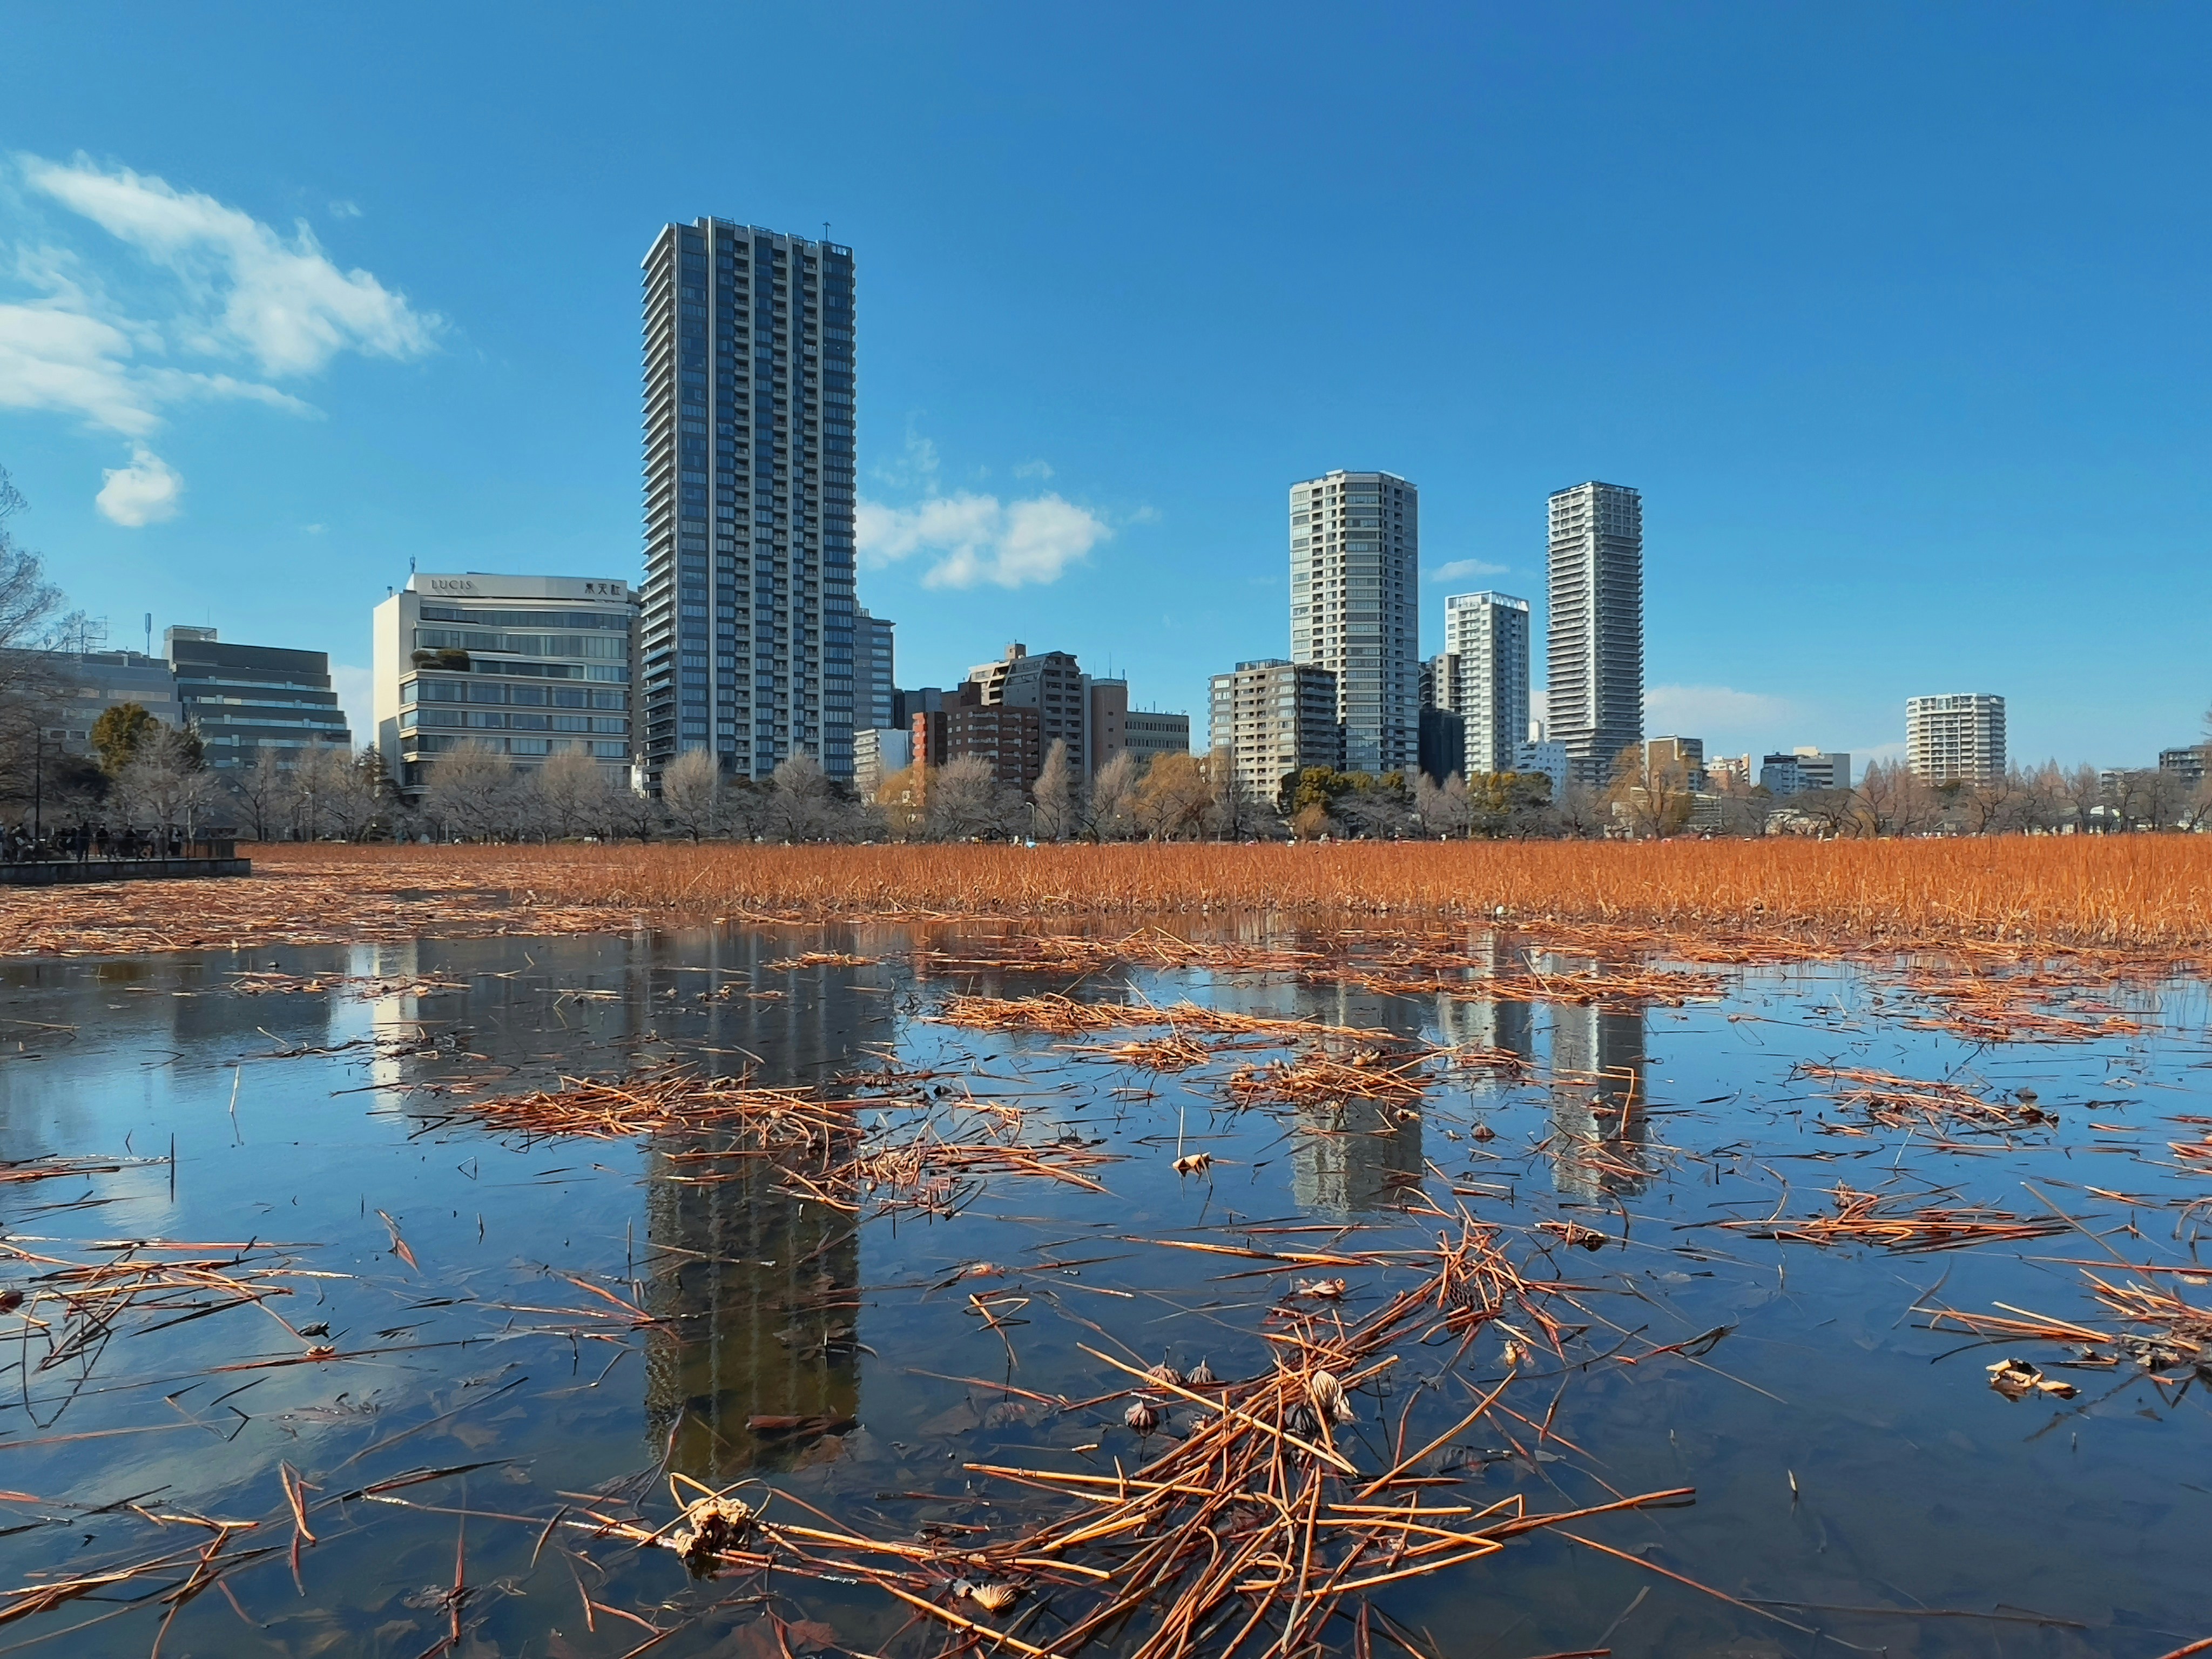 Looking over withering lotus plants in winter towards residential towers under a blue sky, Shinobazu Pond, Taito City, Tokyo, Japan.